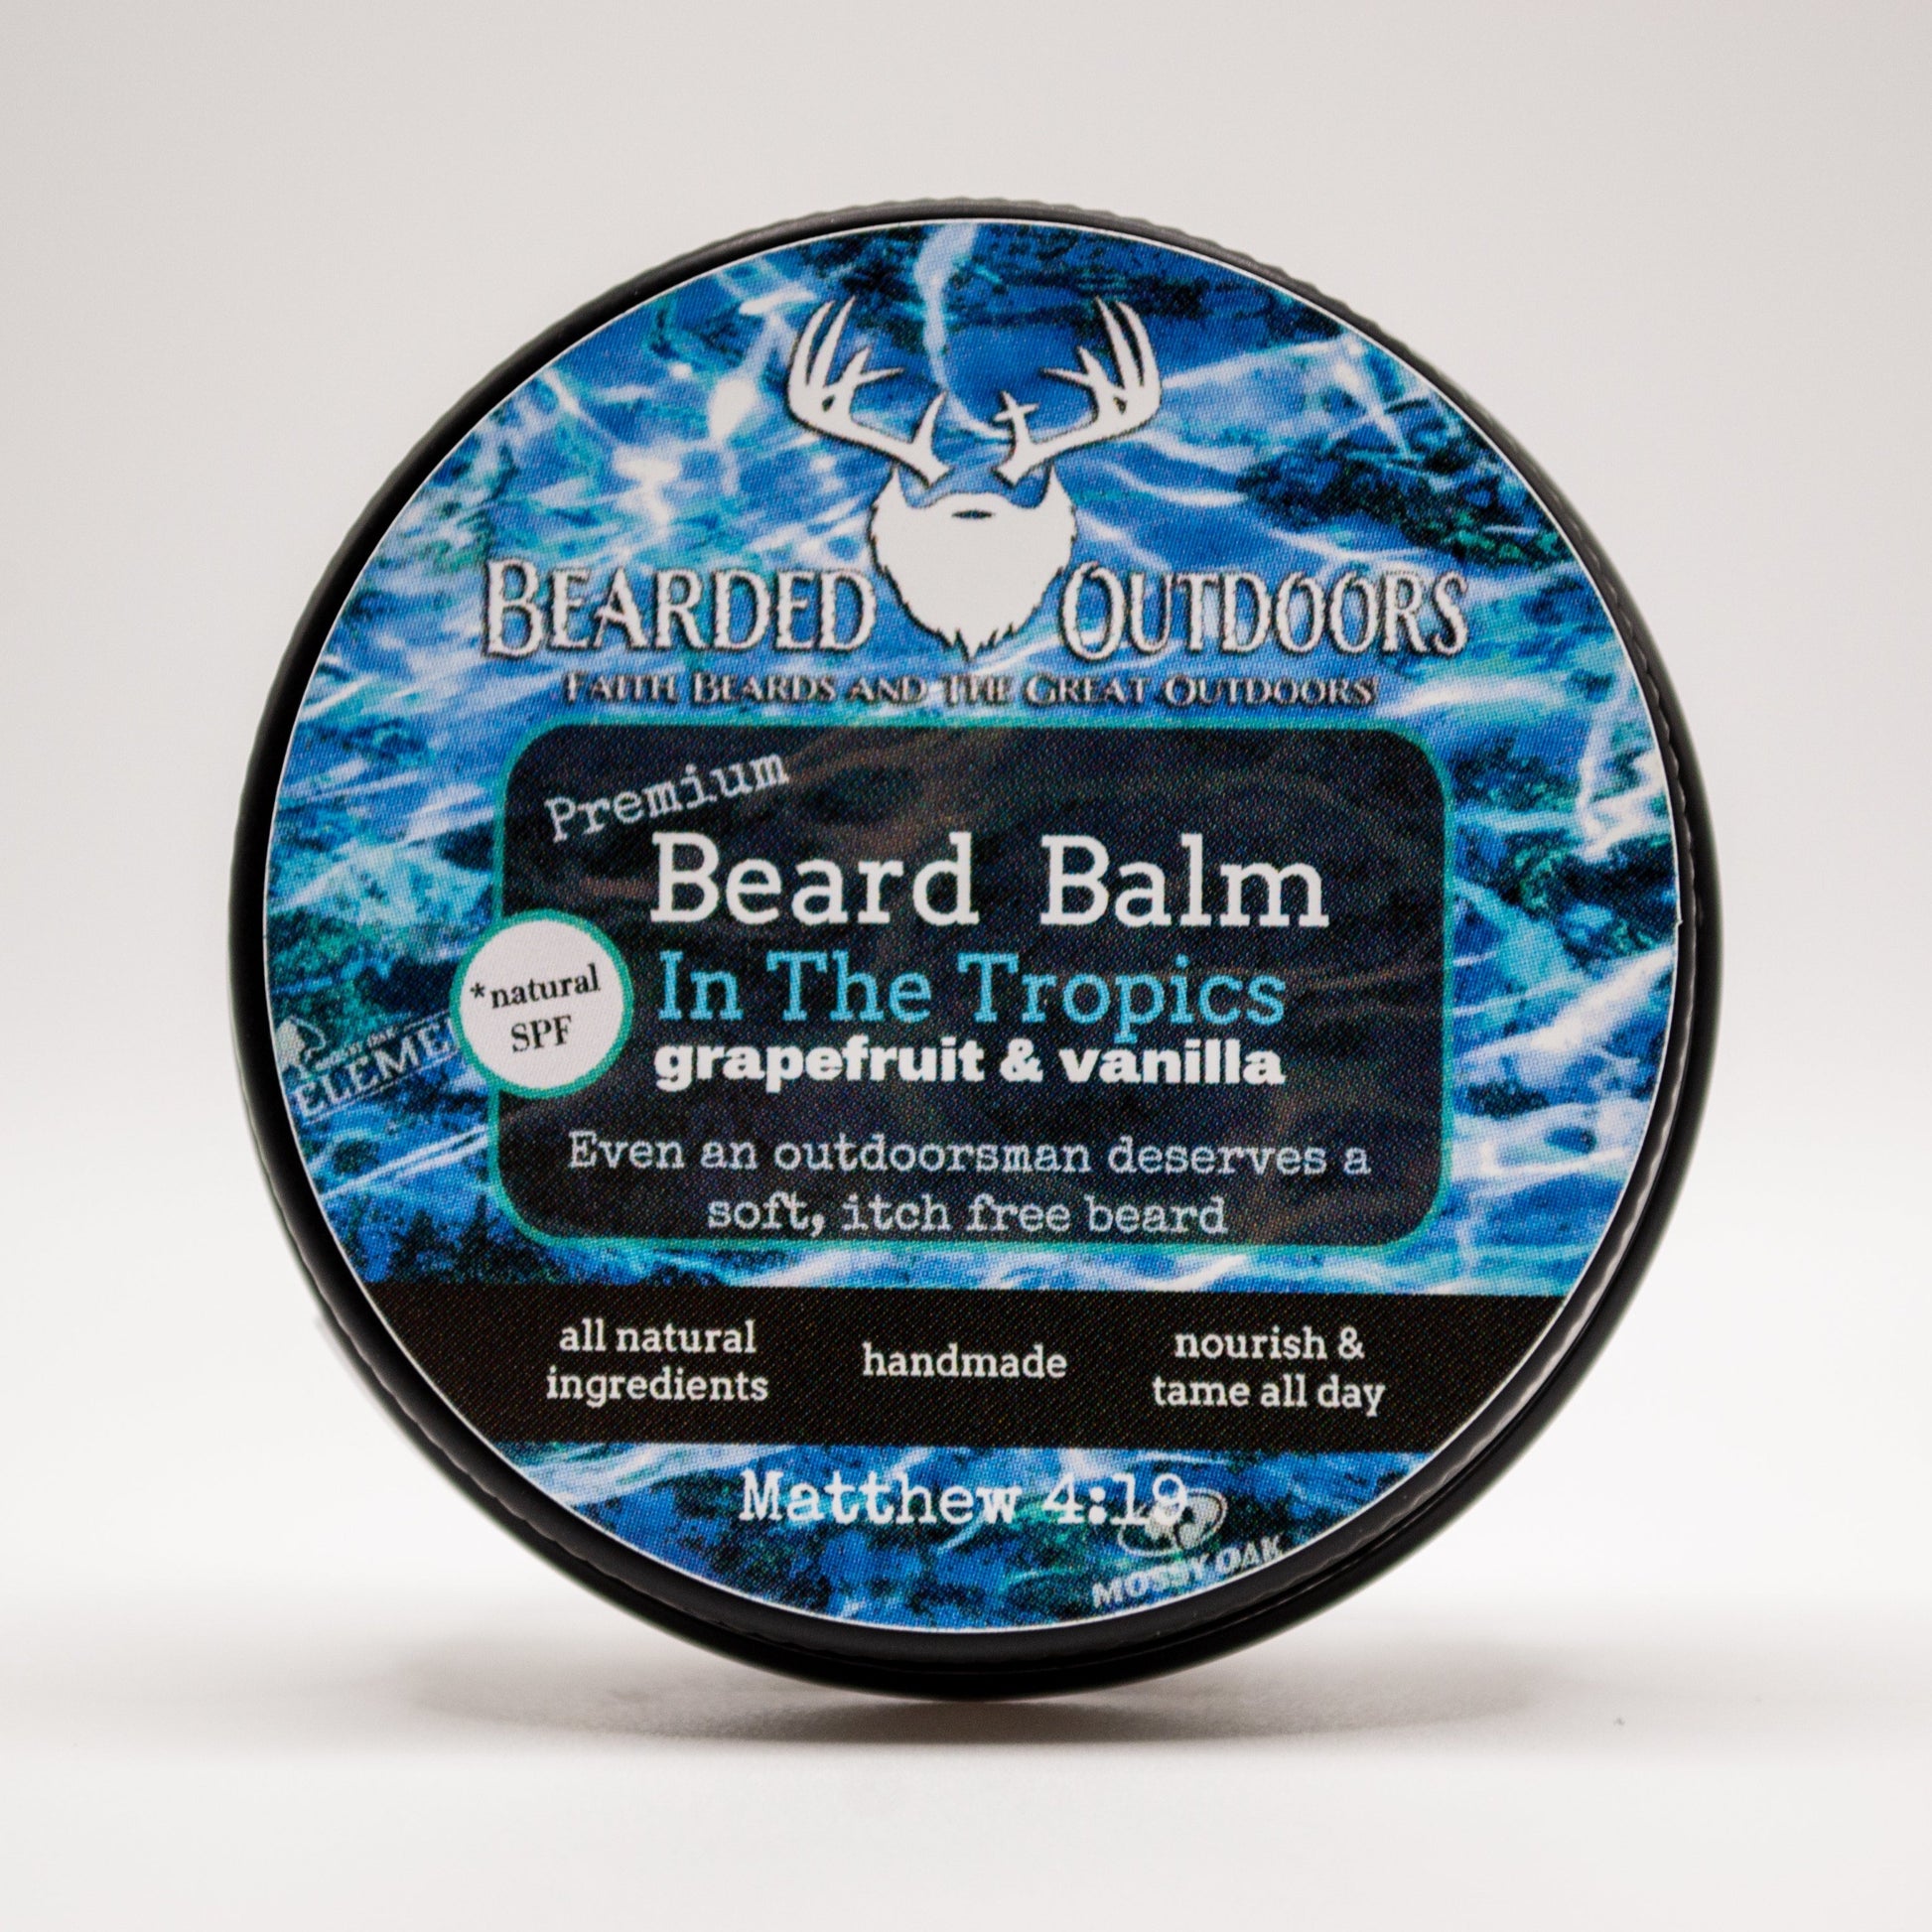 Mossy Oak In The Tropics (grapefruit and vanilla) Premium Beard Balm wrapped in Elements Camo with natural SPF by Bearded Outdoors